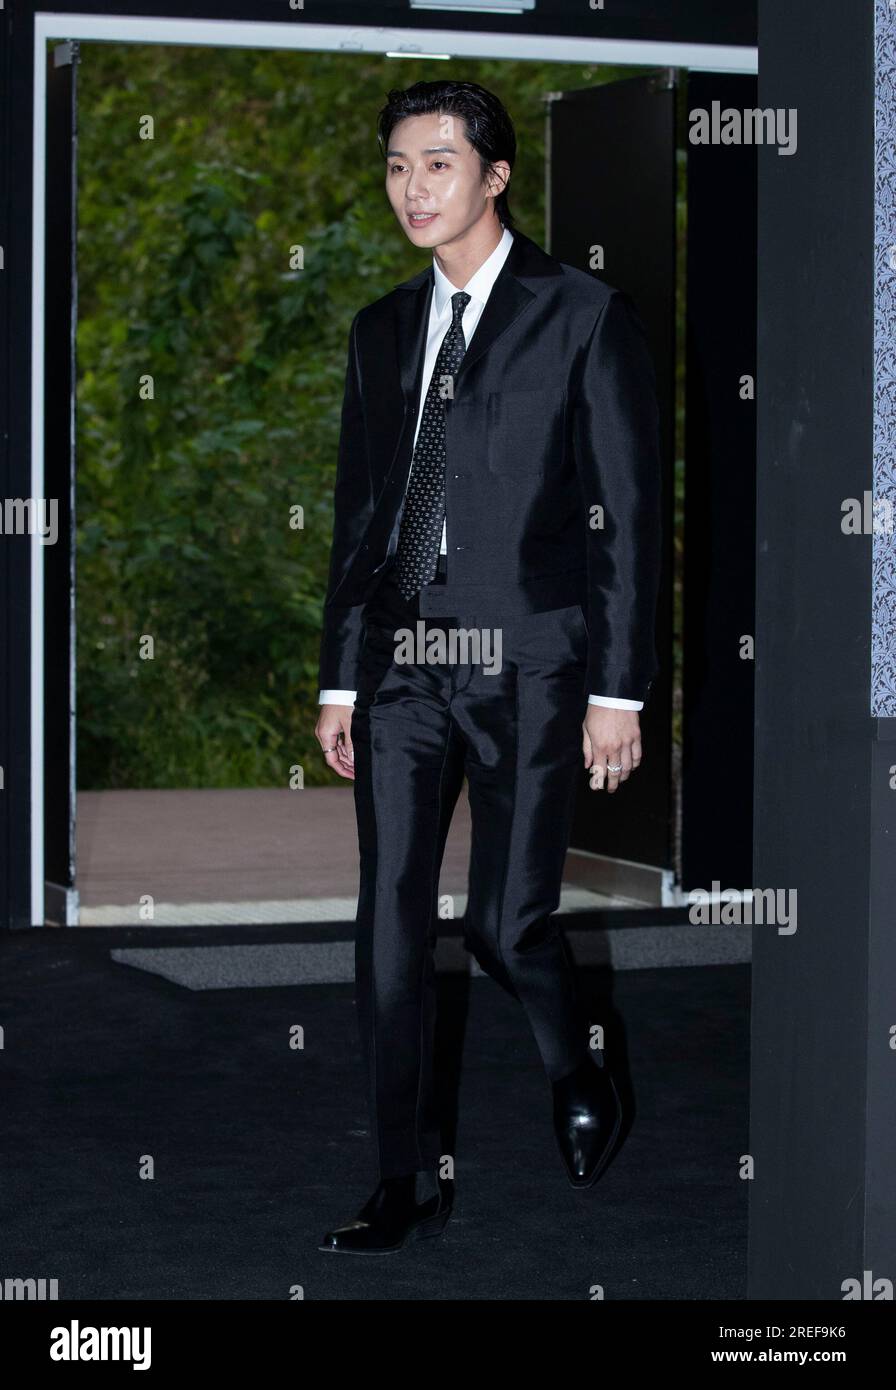 Seoul, South Korea. 27th July, 2023. South Korean actor Park Seo-joon,  attends a photocall for the Tweed de Chanel Collection Event in Seoul,  South Korea on July 27, 2023. (Photo by: Lee